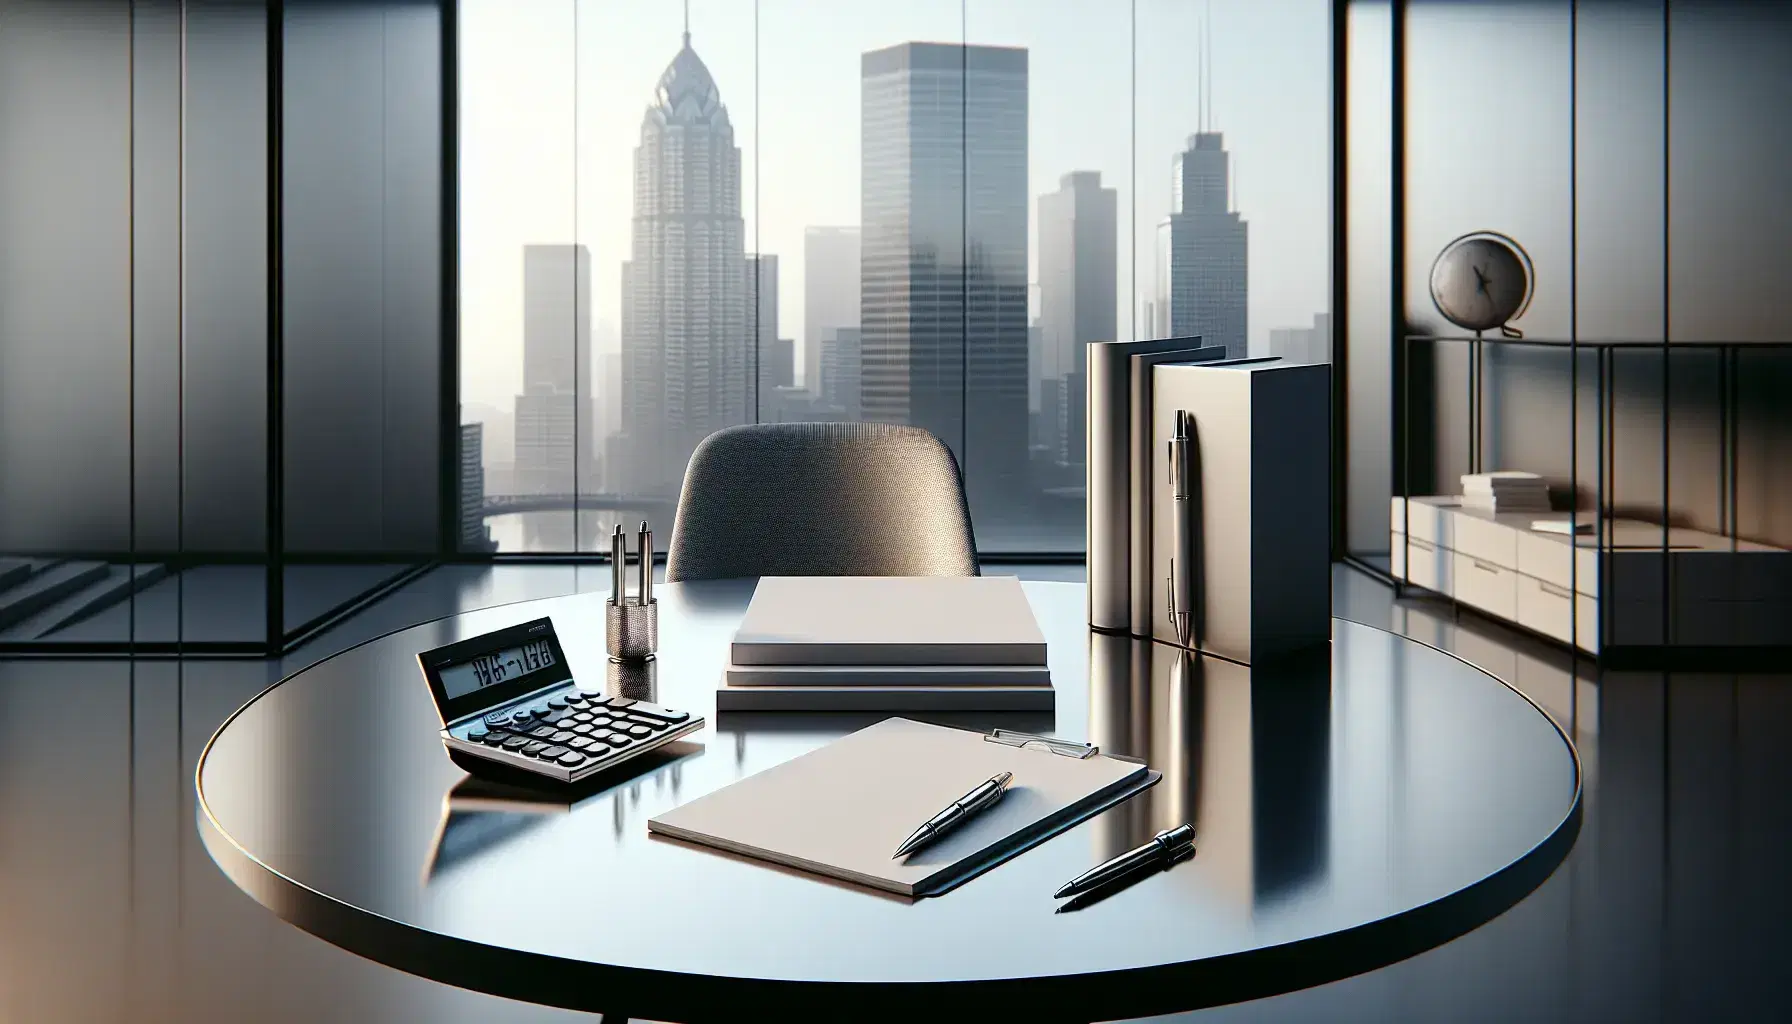 Modern office with a round table holding a mechanical calculator, metallic pen, stack of white paper, and a closed hardcover textbook, cityscape in the background.